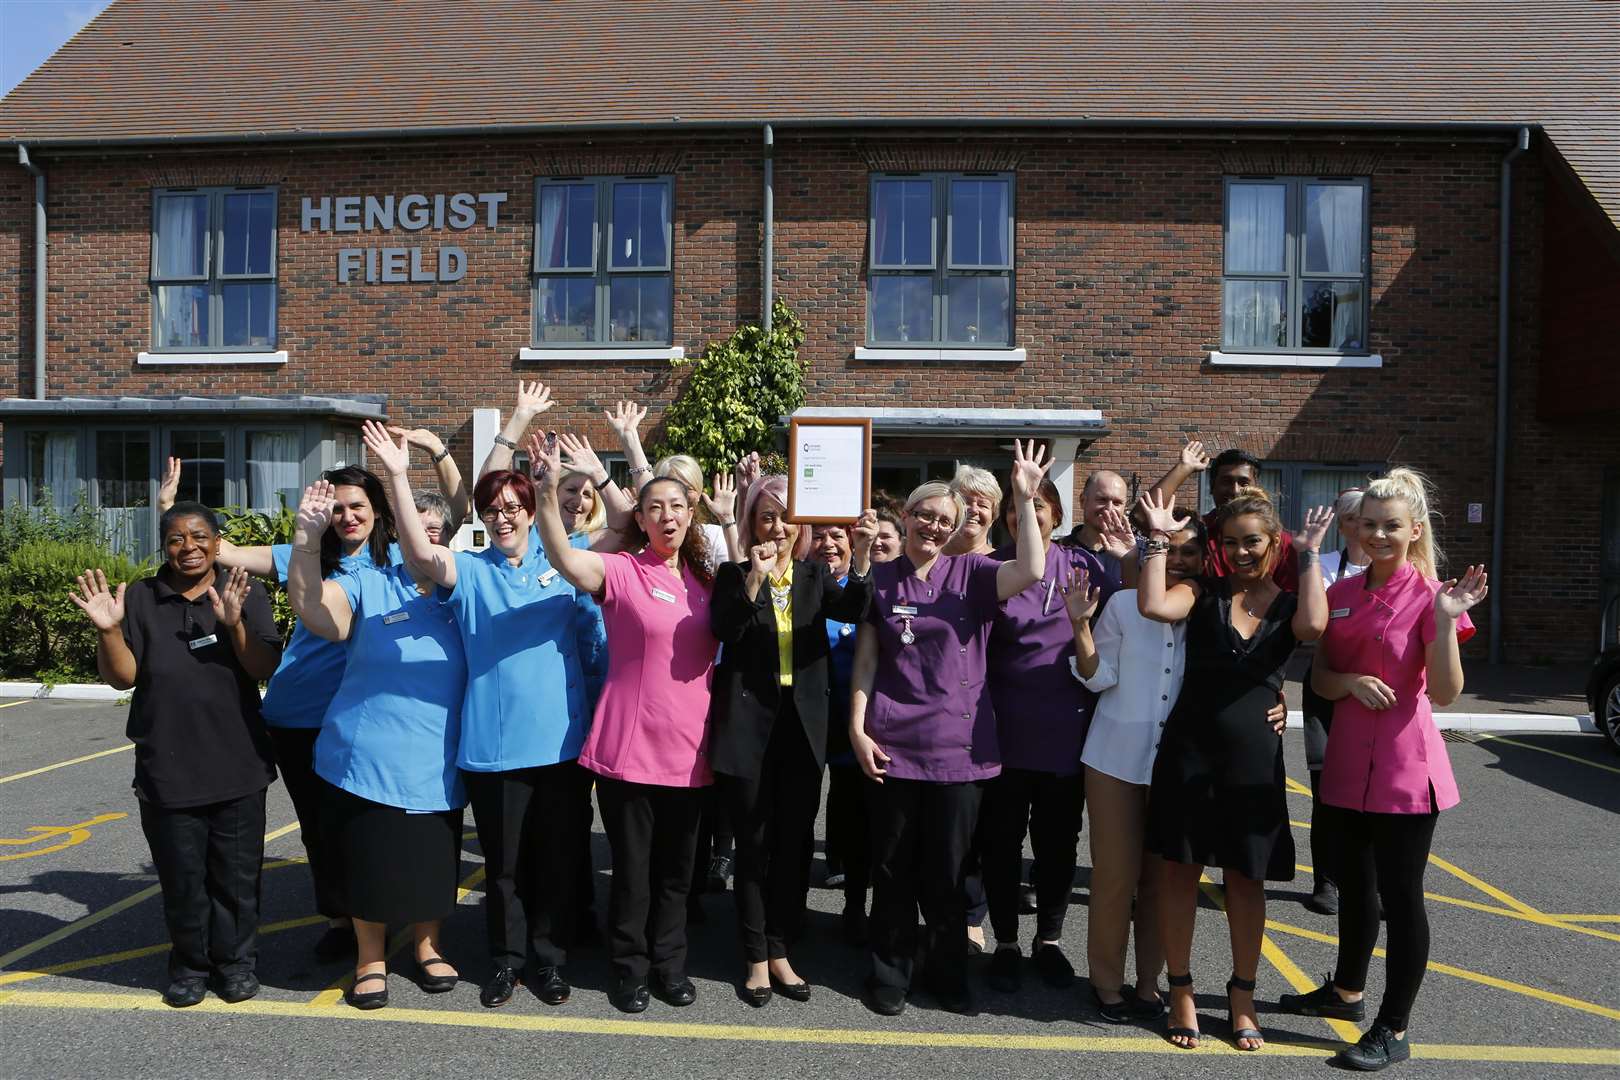 Staff at Hengist Field Care Home in Borden celebrating a ‘good’ CQC rating last year